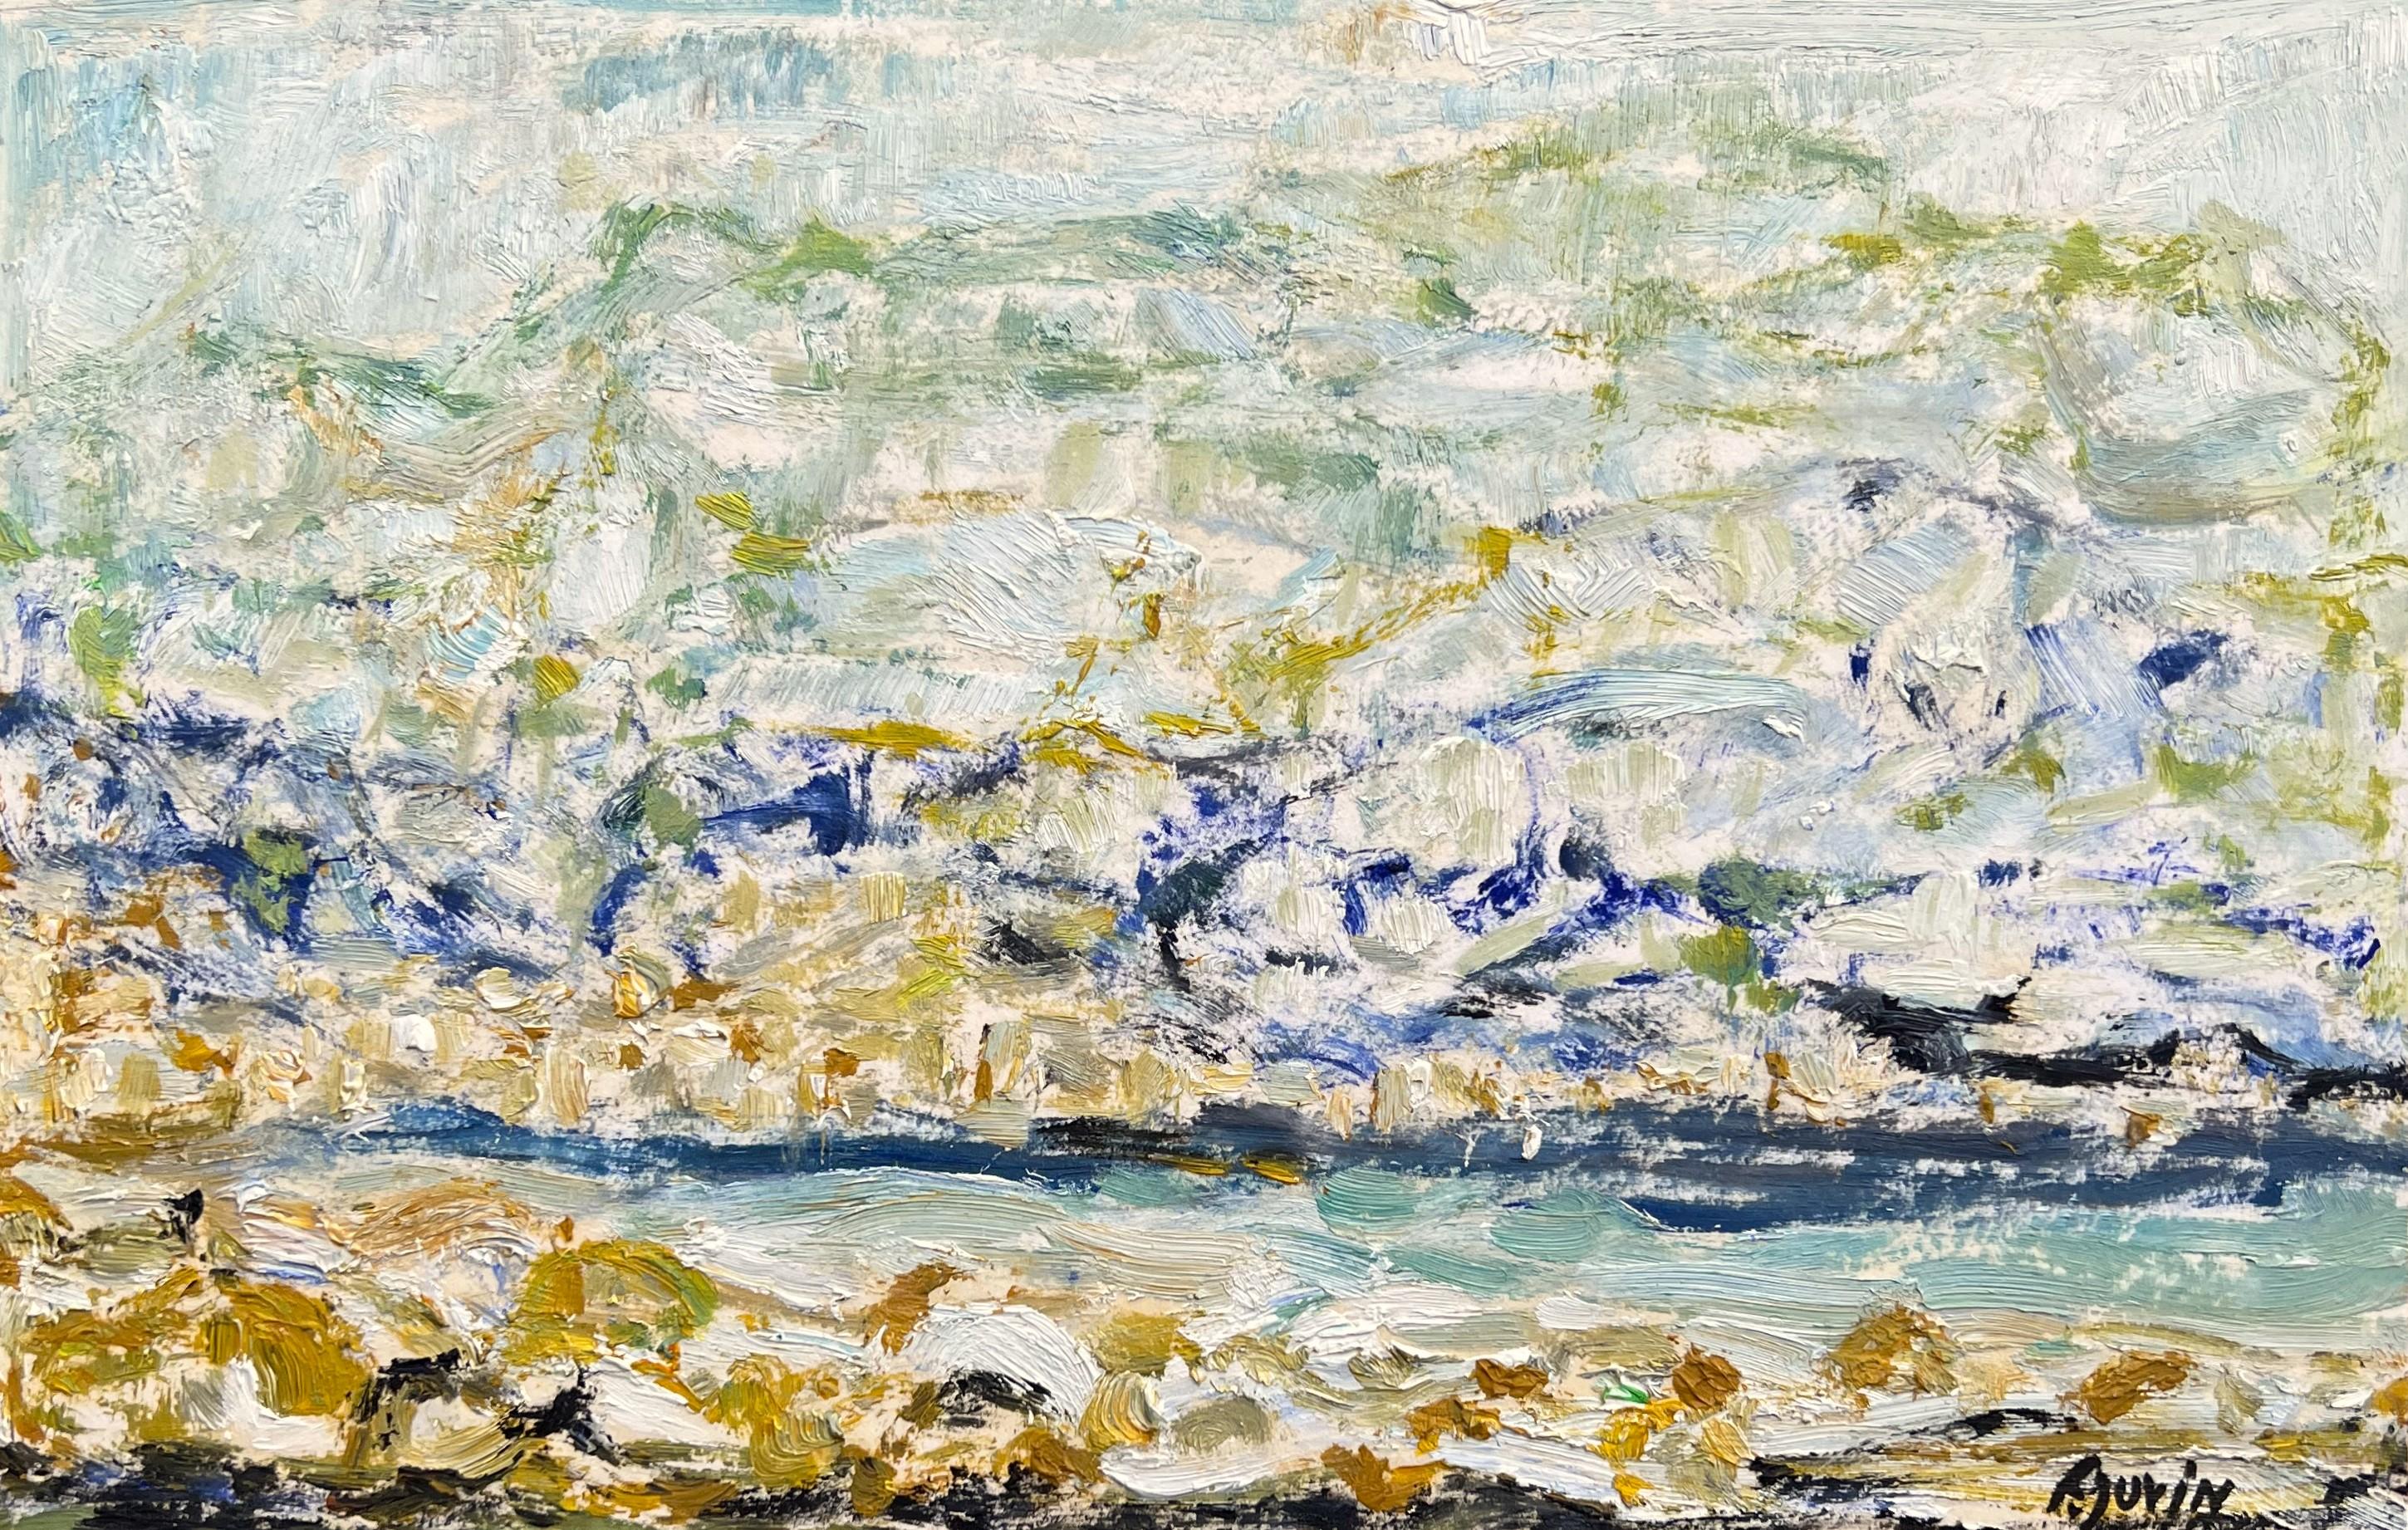 Françoise Juvin - Sea landscape around Cannes
Reference number FJ125
Framed with a natural oak floated frame.
22,5 x 32 cm frame included (17 x 26 cm without frame)
This work is painted with oil on a paper that is mounted on a board and placed in a